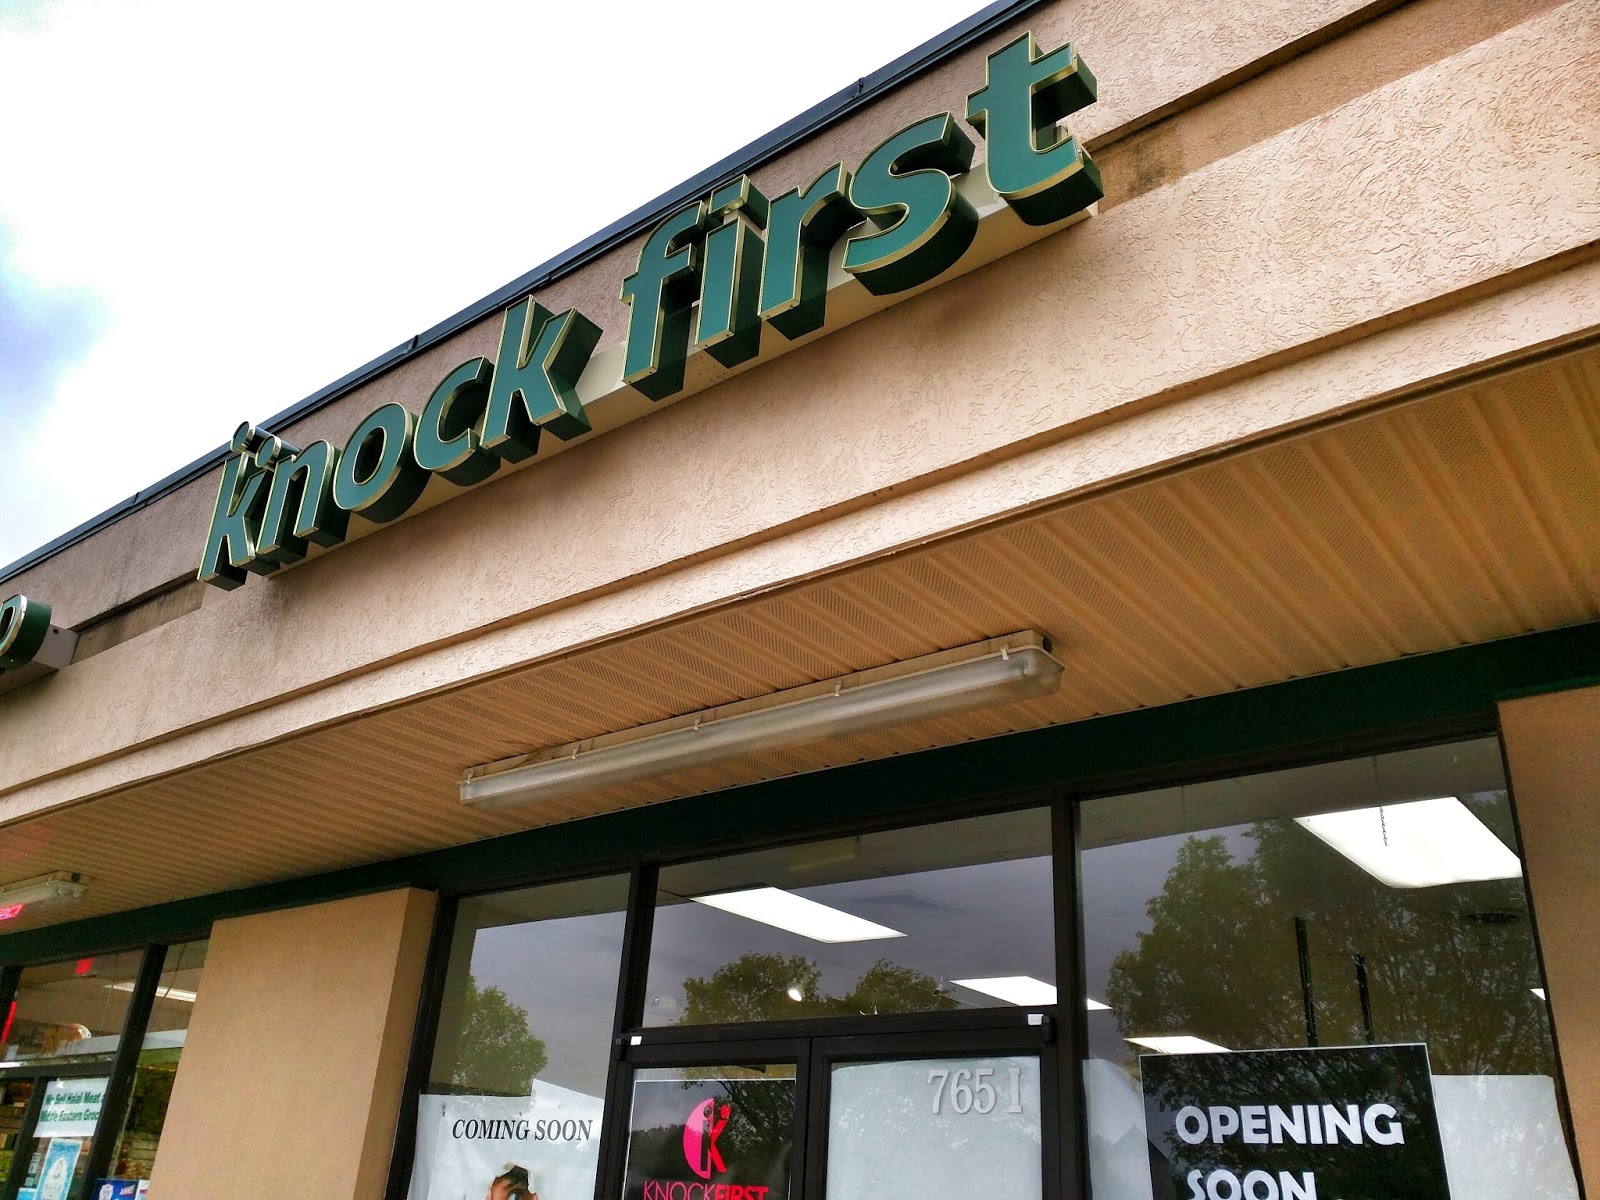 Knock First lingerie and adult toy store coming to Rockville (Photos) .